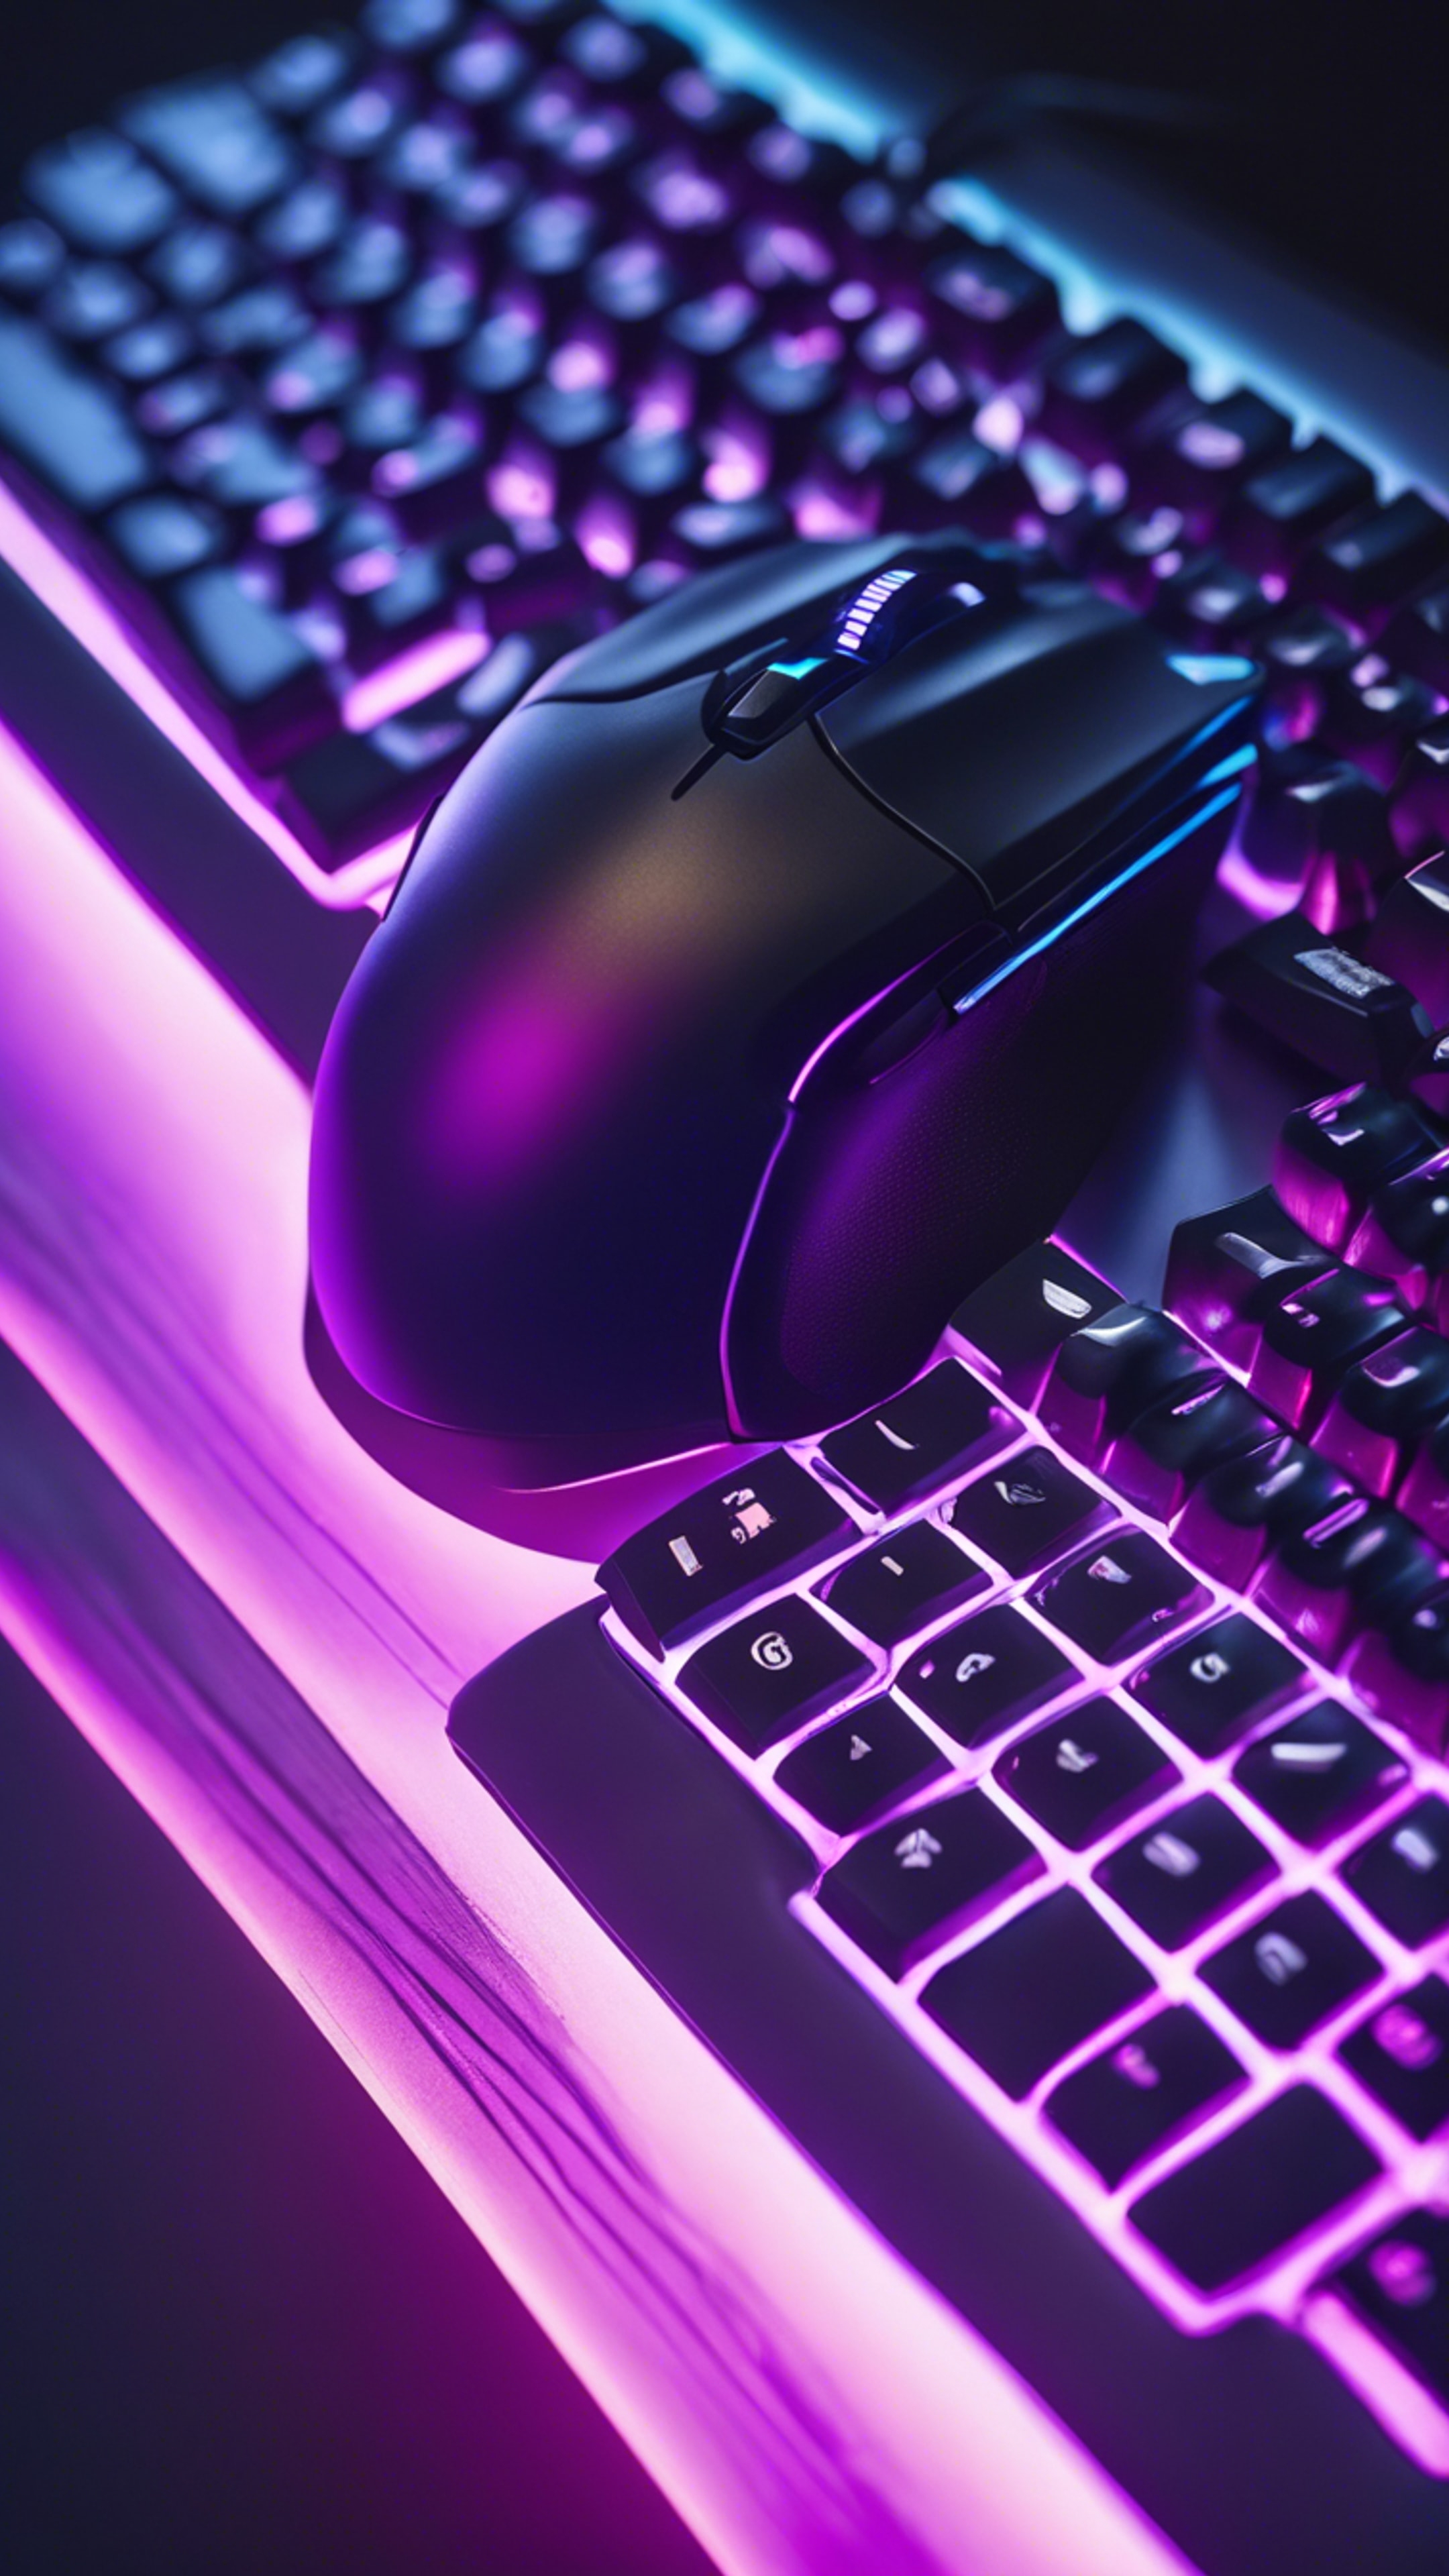 A top down view of a gaming keyboard and mouse bathed in a soothing gradient of blue to purple backlighting. Дэлгэцийн зураг[d1c9d3144afe4da3b536]